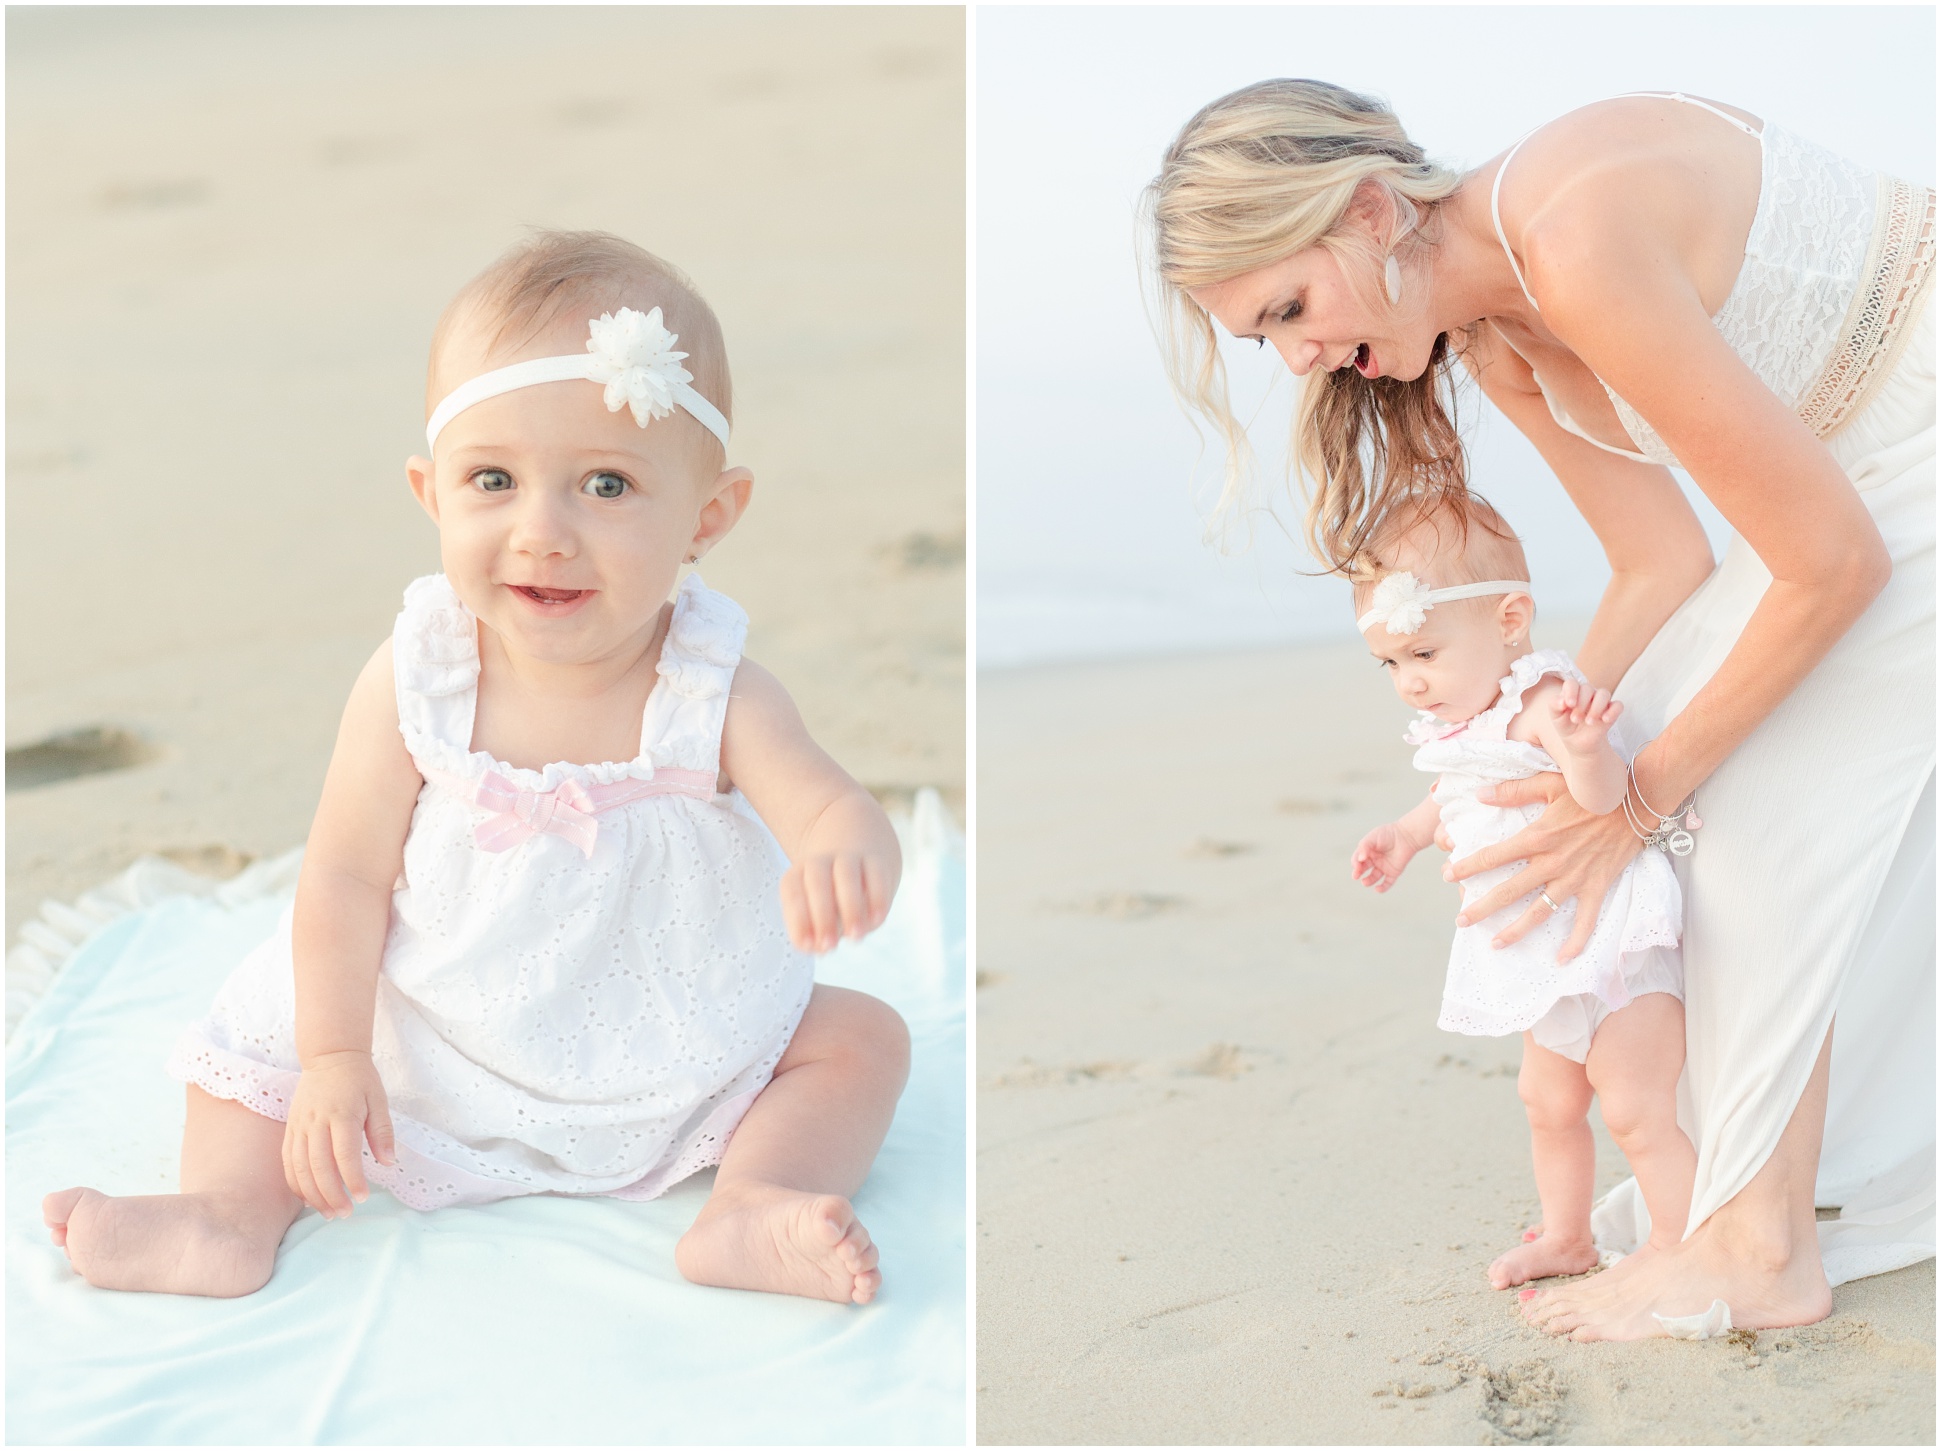 baby sitting on blanket at the beach while smiling at camera; mom helping baby walk on the beach